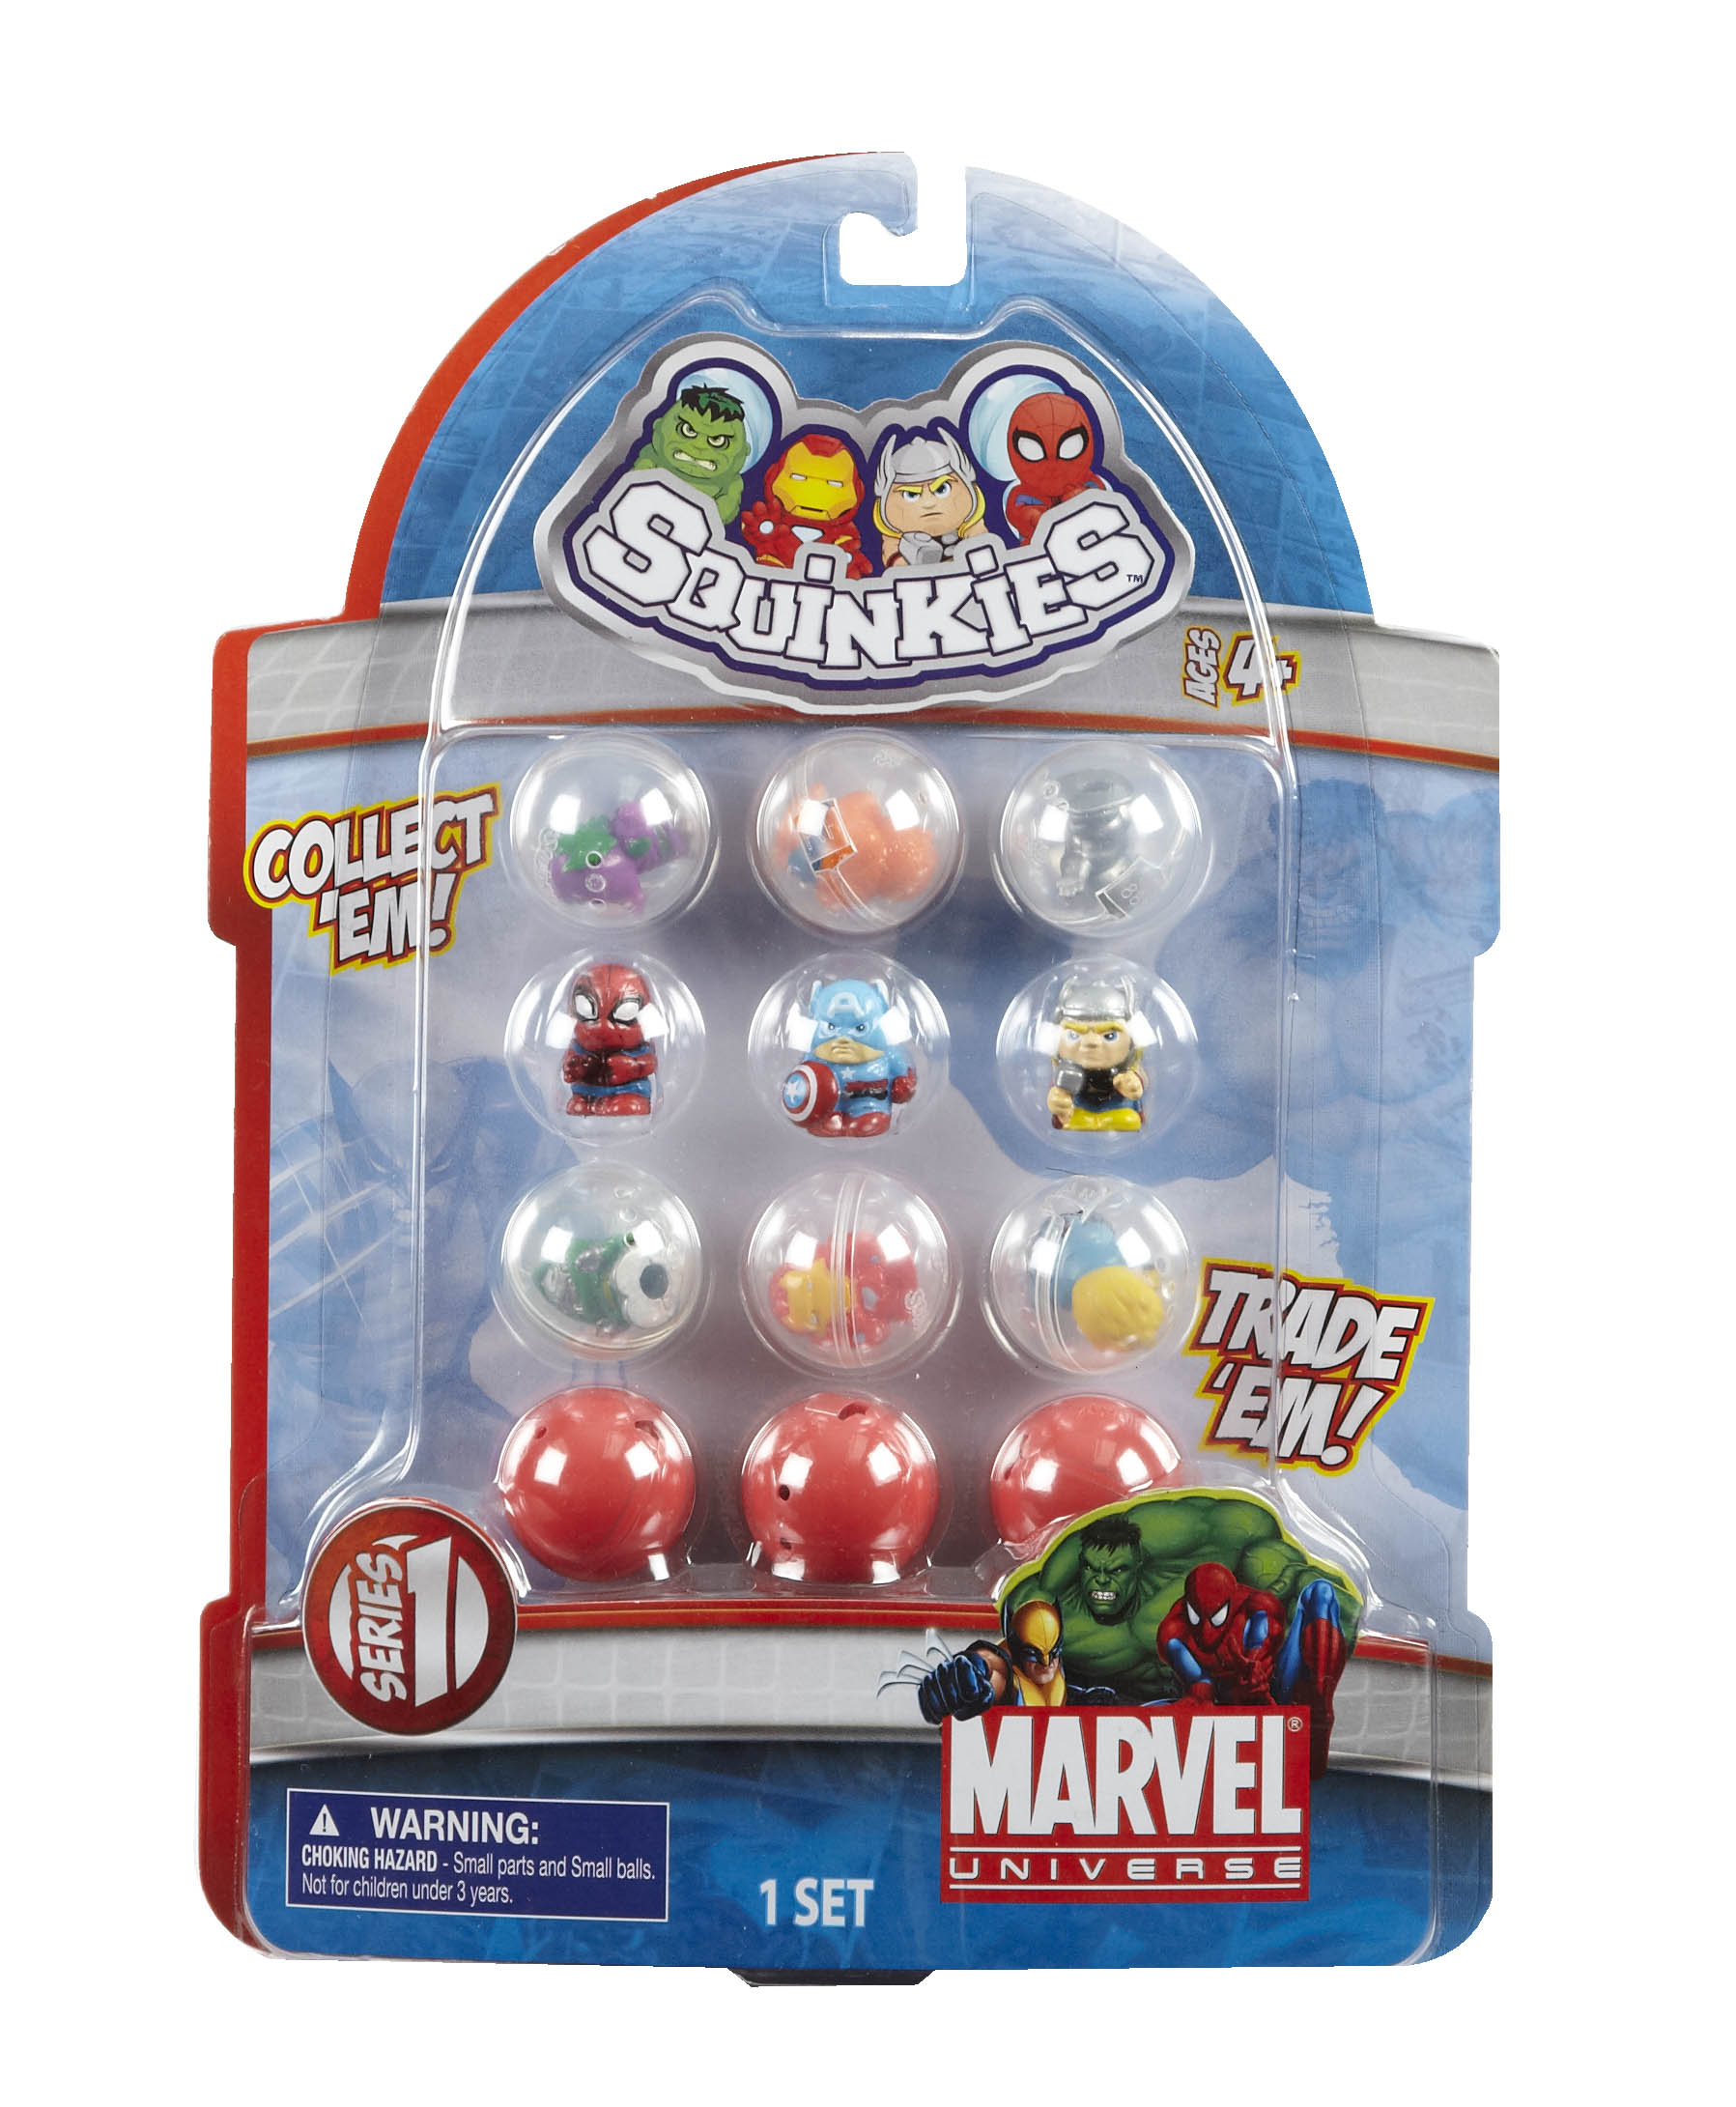 Squinkies Marvel 12pc Bubble Pack 1